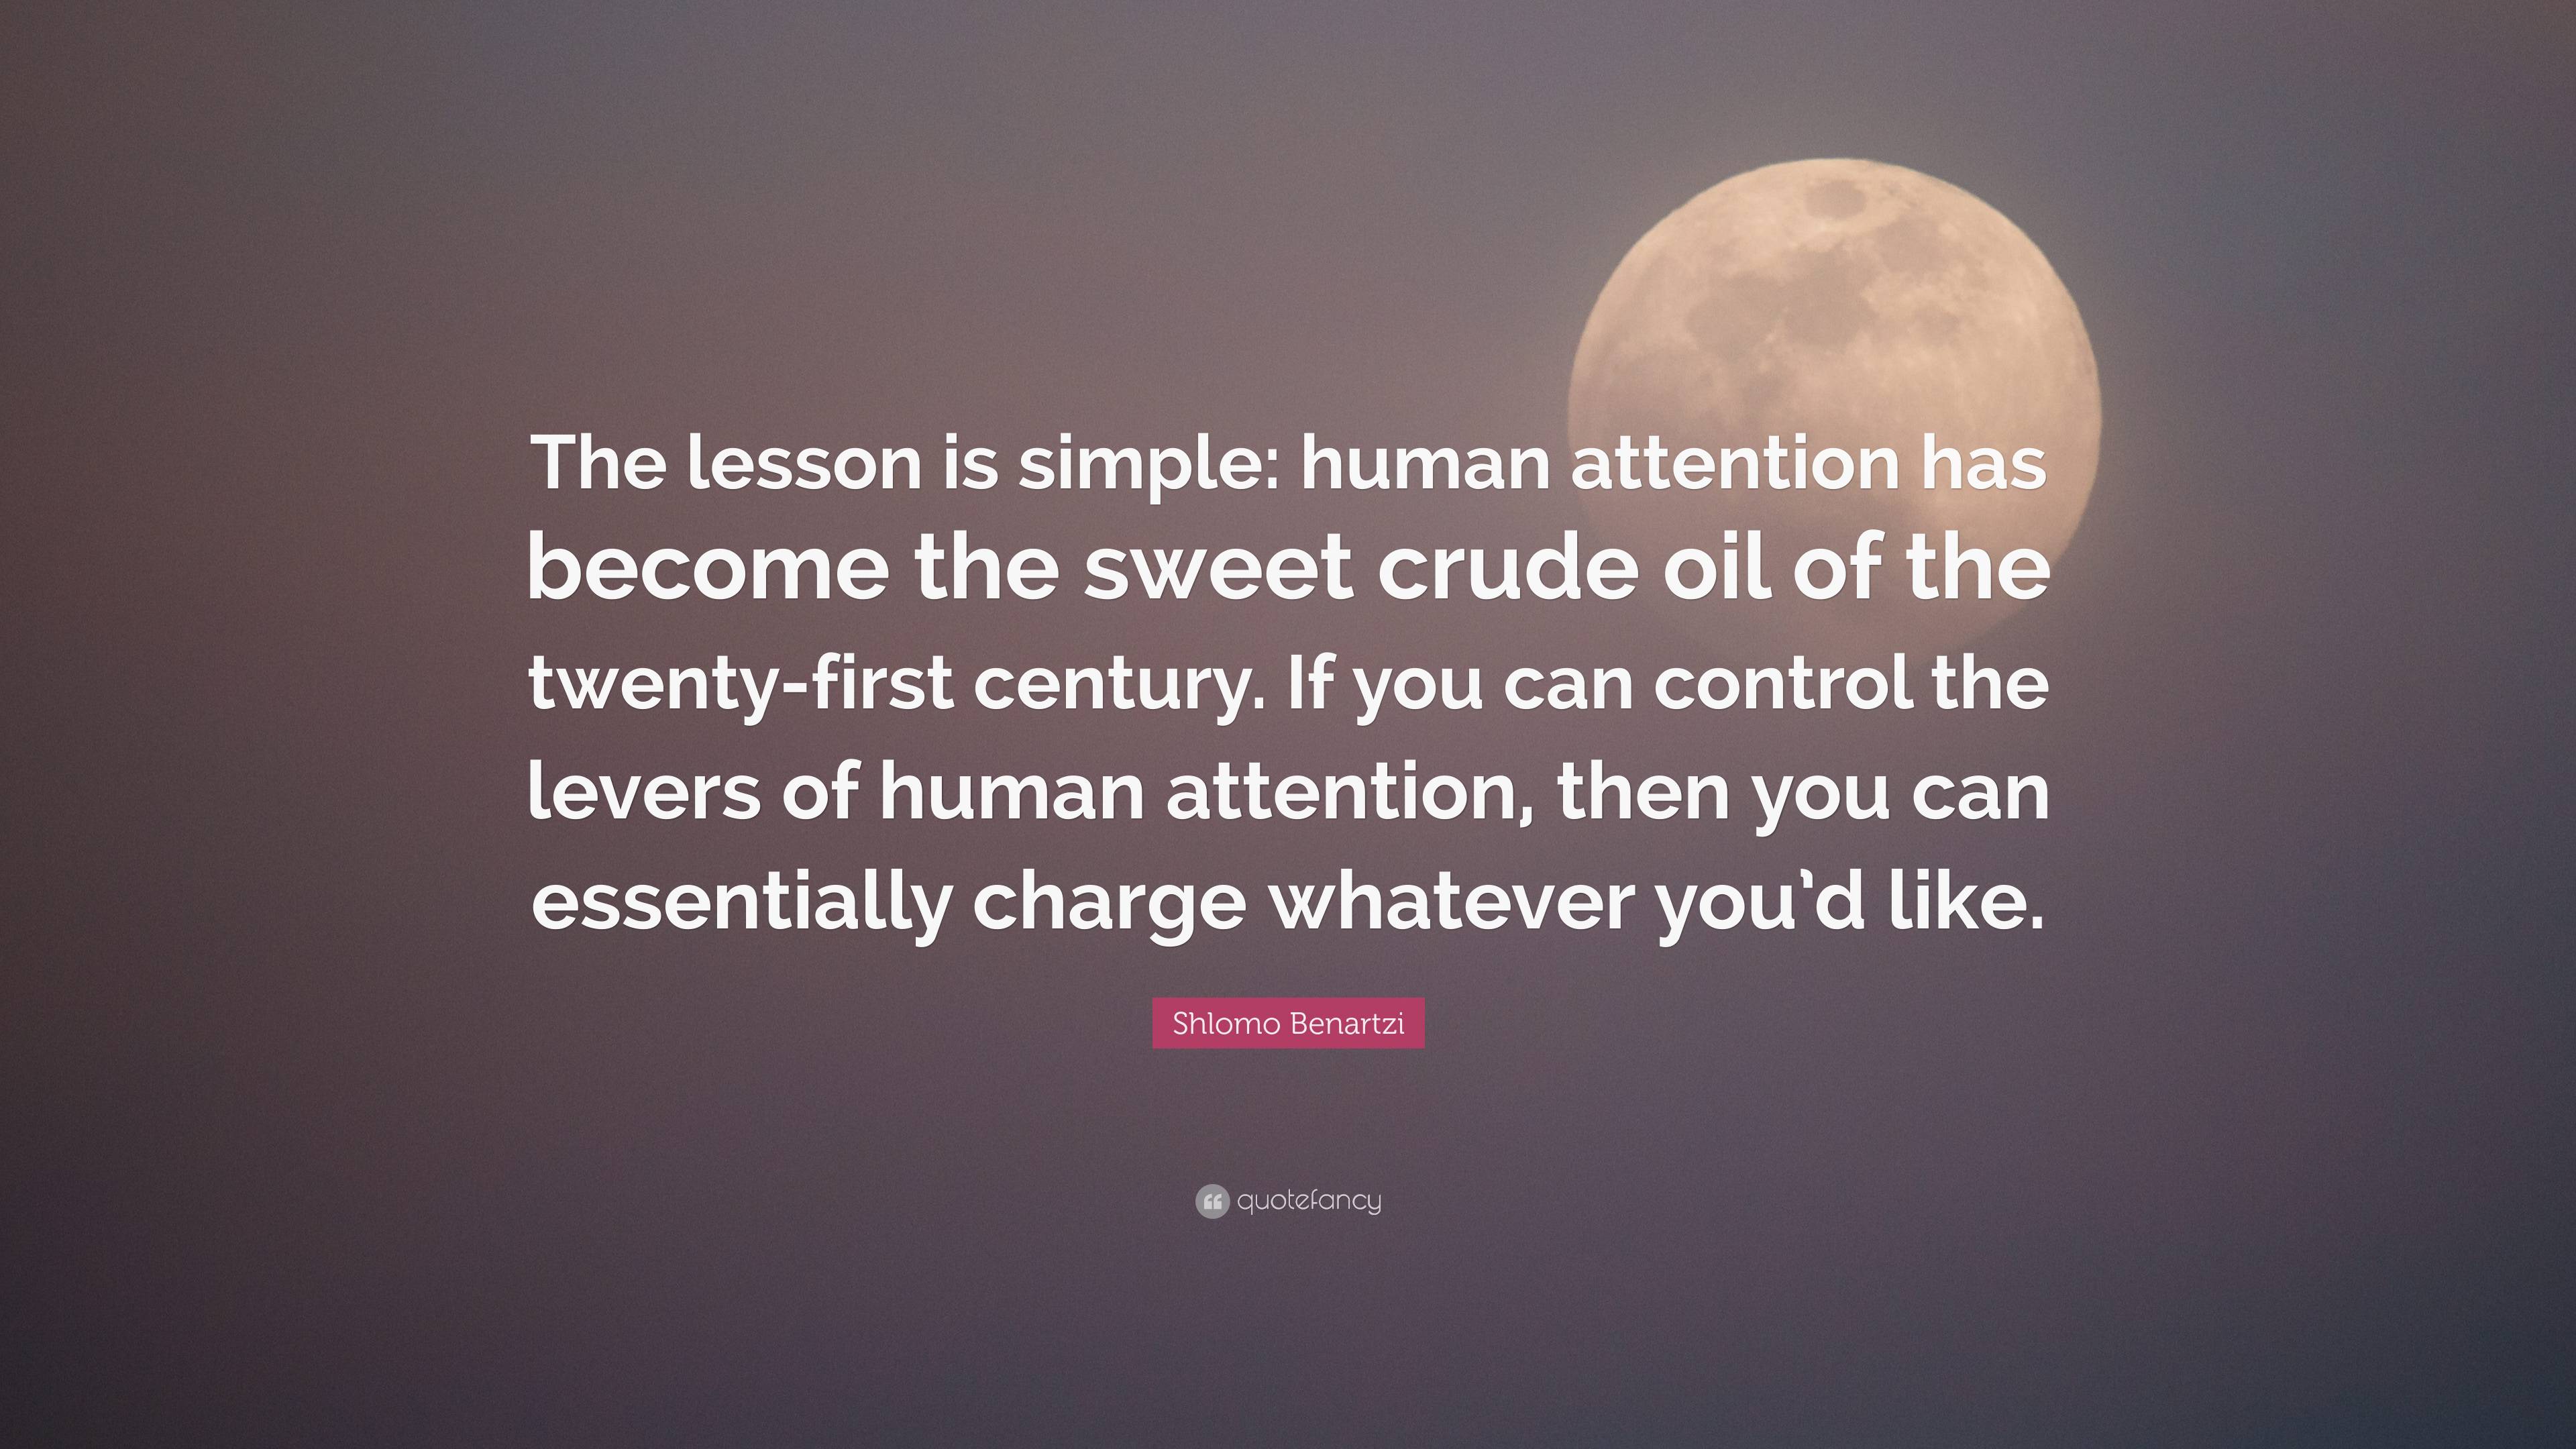 Shlomo Benartzi Quote: “The lesson is simple: human attention has become  the sweet crude oil of the twenty-first century. If you can control the”